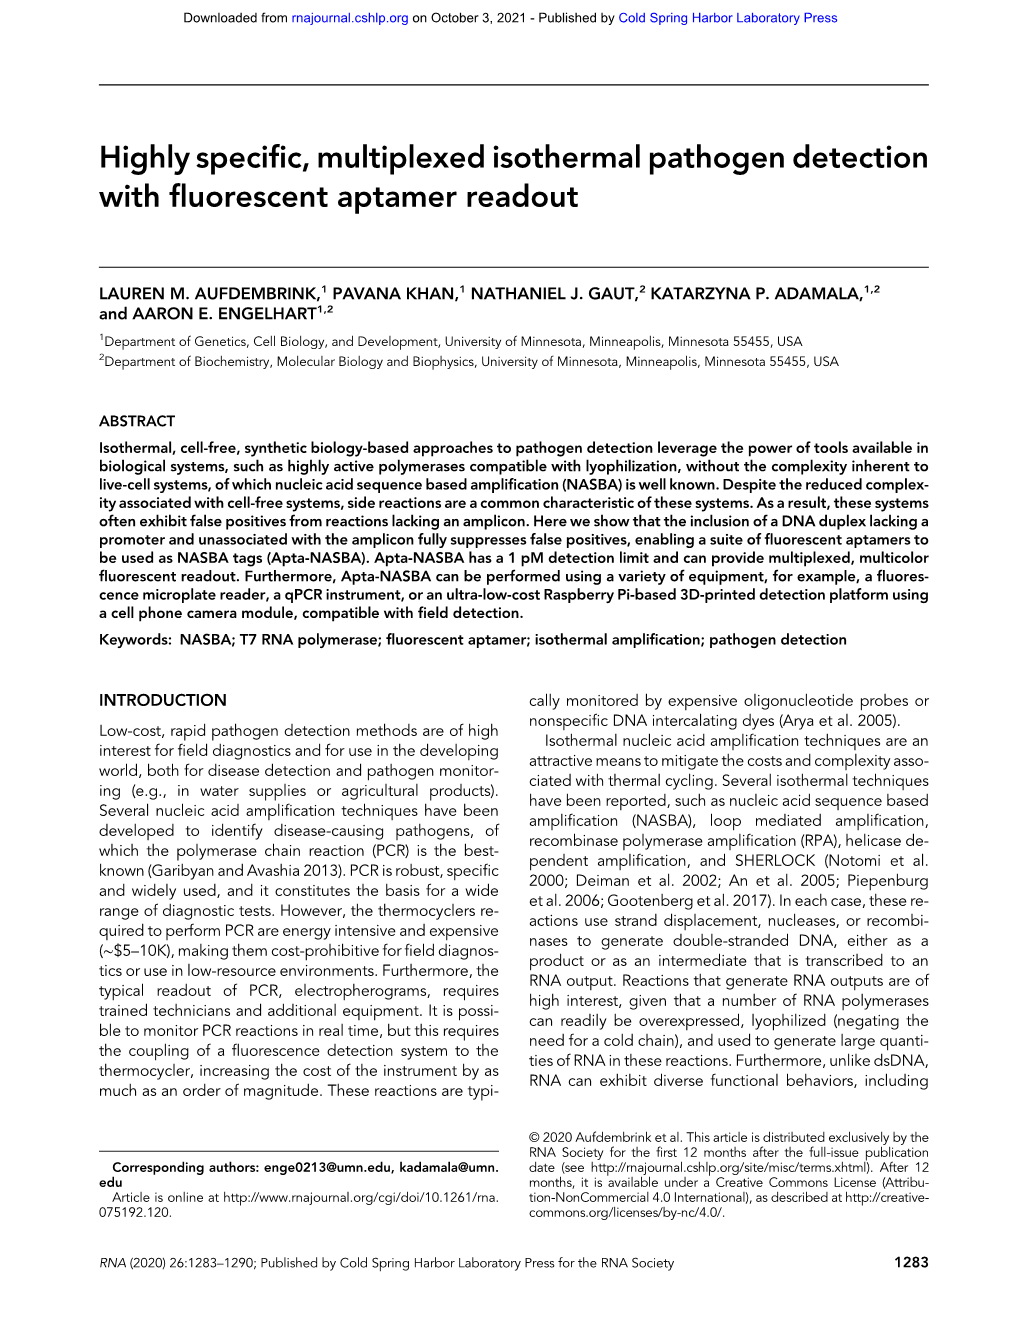 Highly Specific, Multiplexed Isothermal Pathogen Detection with Fluorescent Aptamer Readout